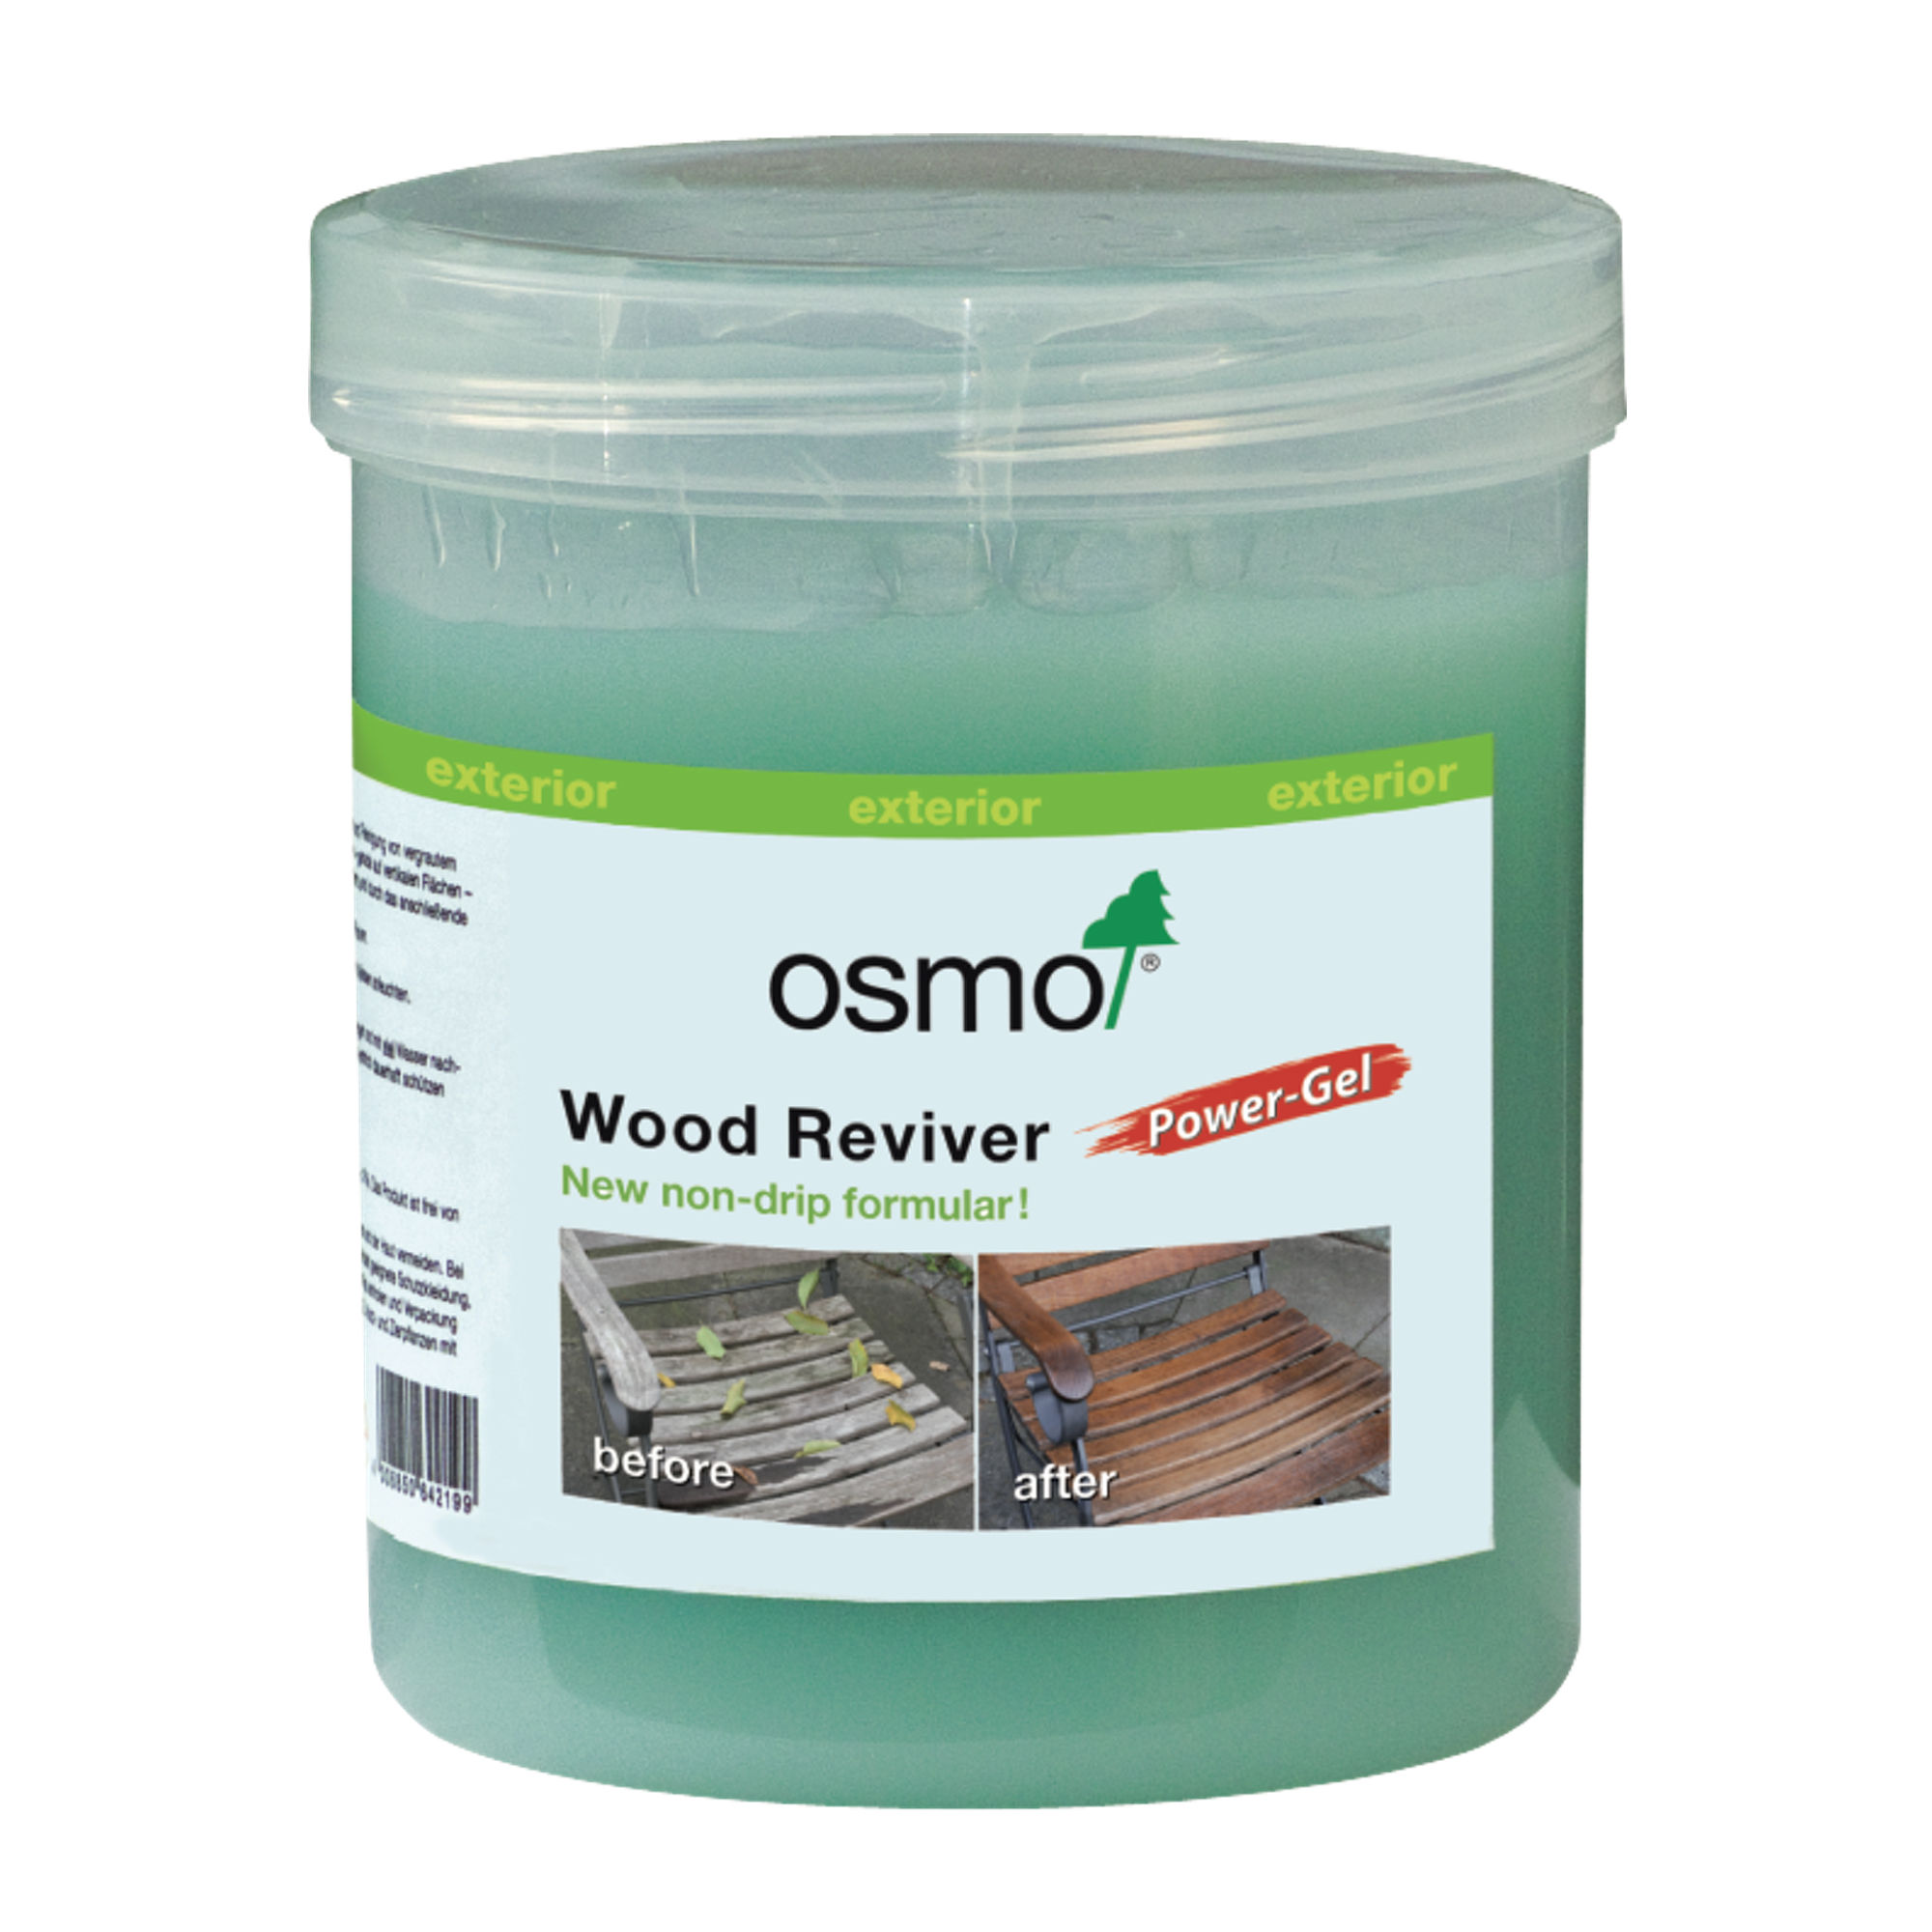 Osmo Wood Reviver Power Gel Wood Cleaner with Deck Cleaning Brush 2.5L - 6609D